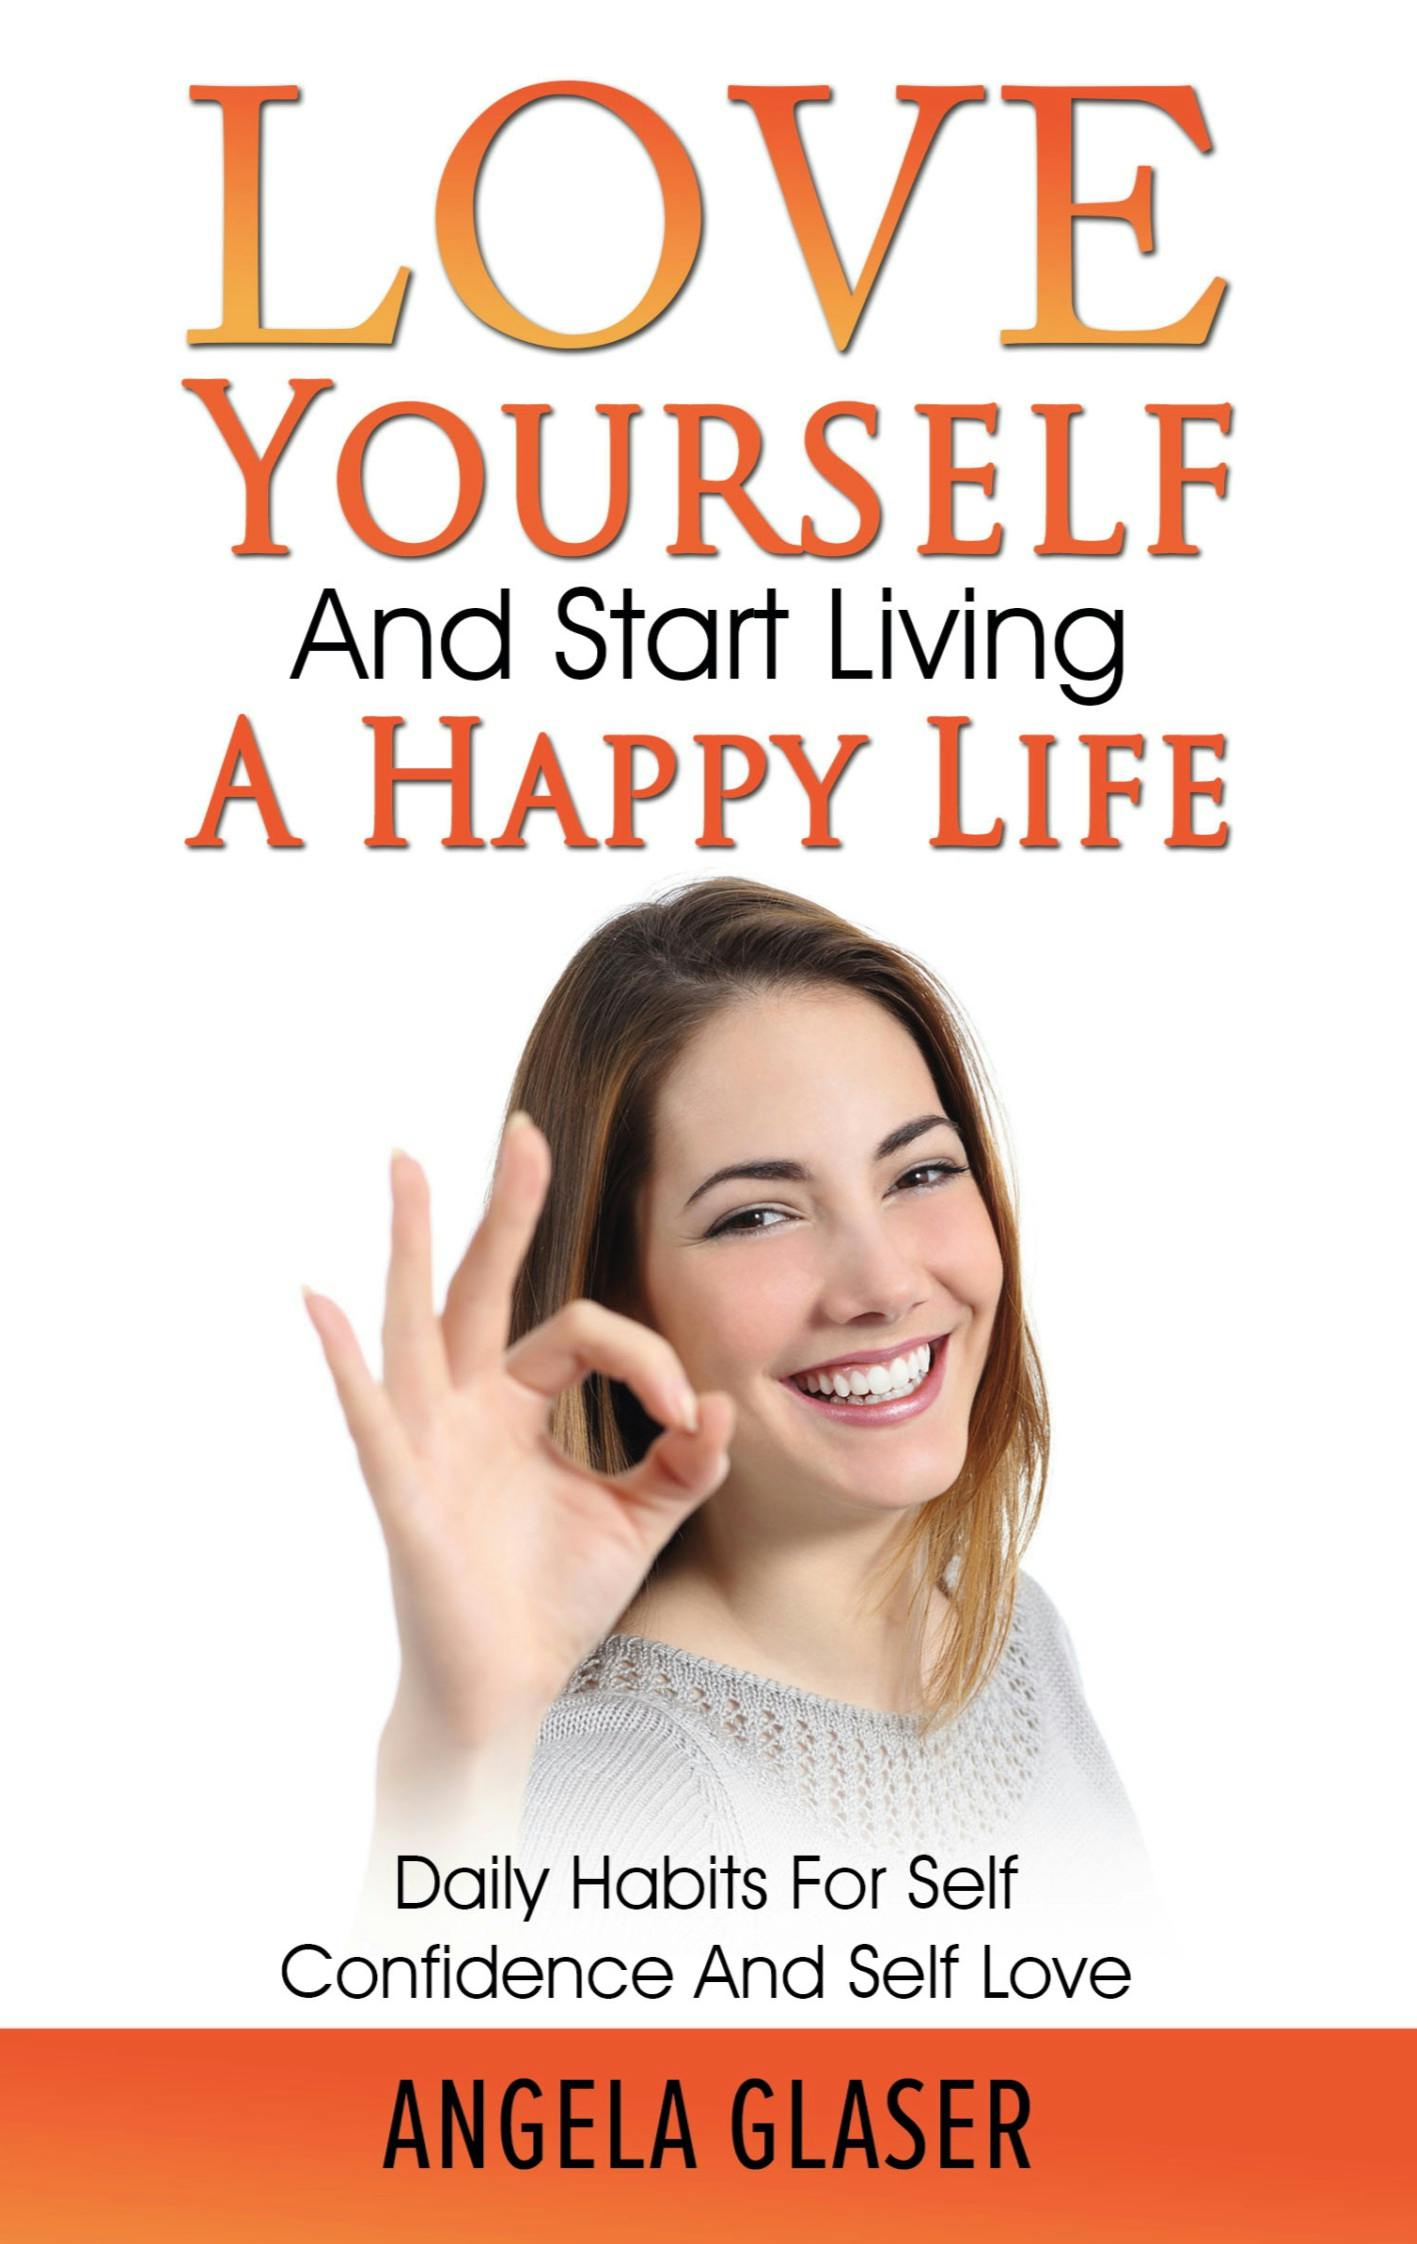 Love Yourself And Start Living A Happy Life - Angela Glaser